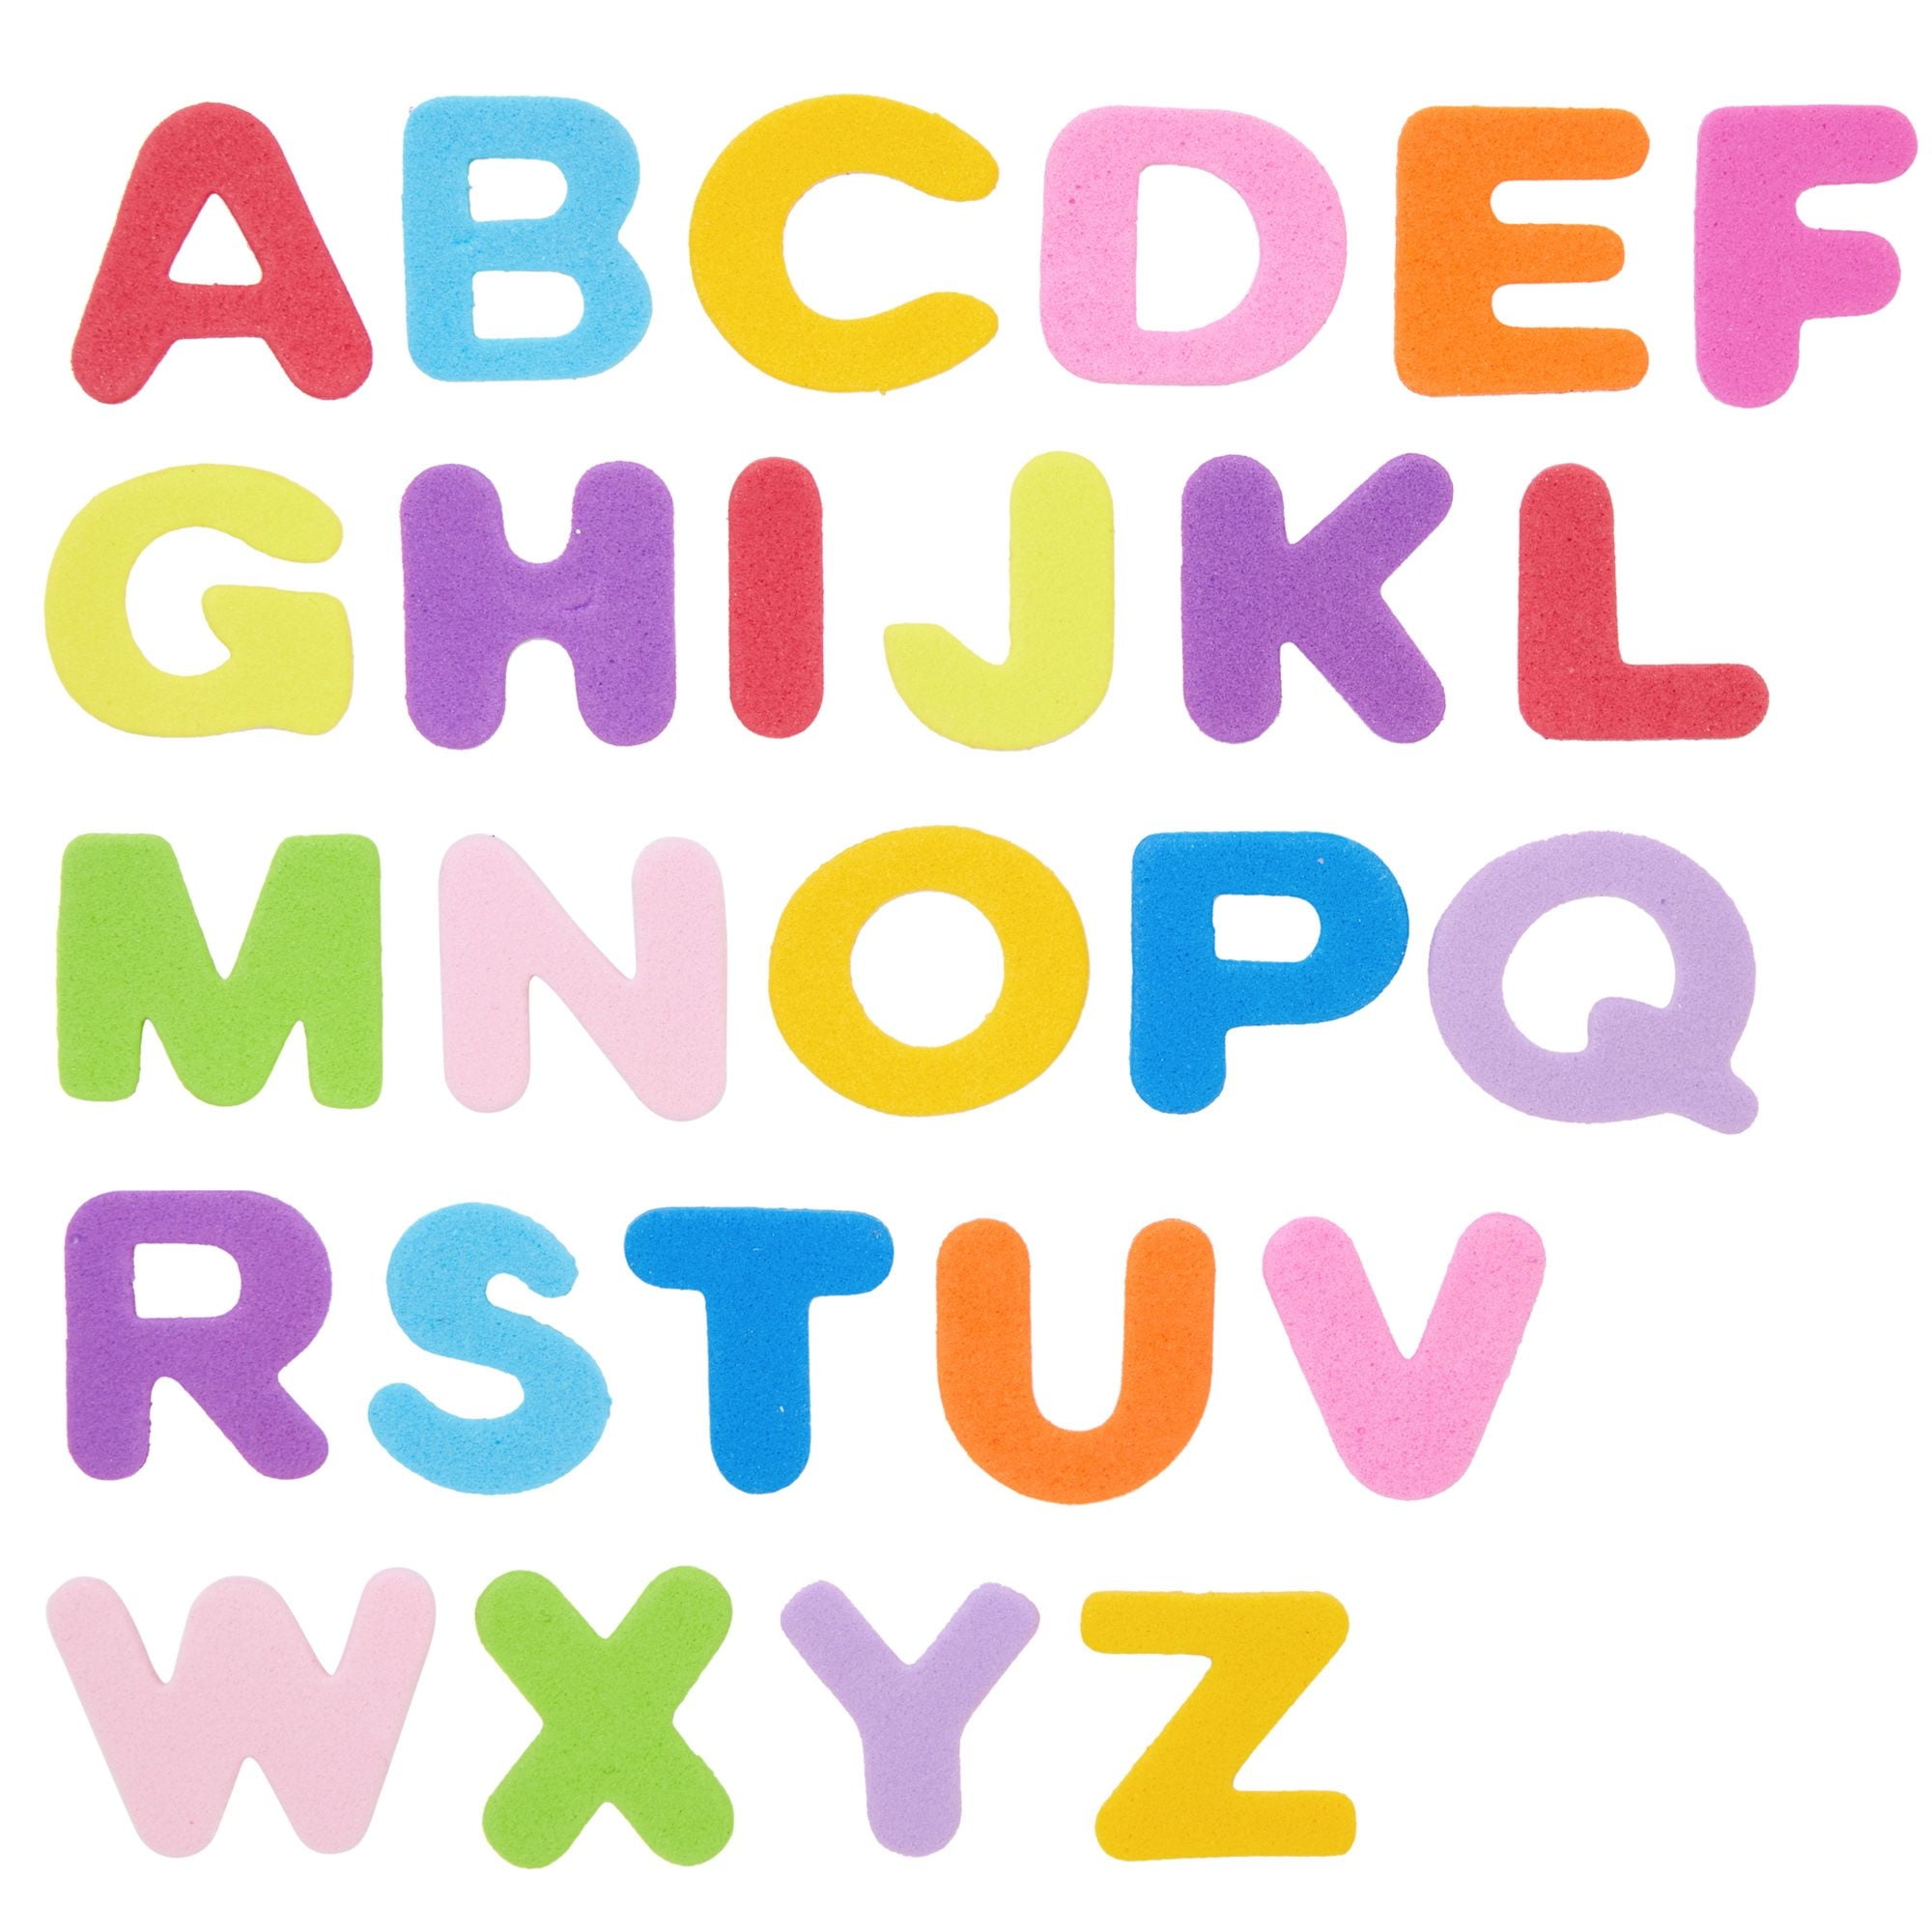 1560 Pieces Foam Letter Stickers for Crafts, 50 Sets of Self